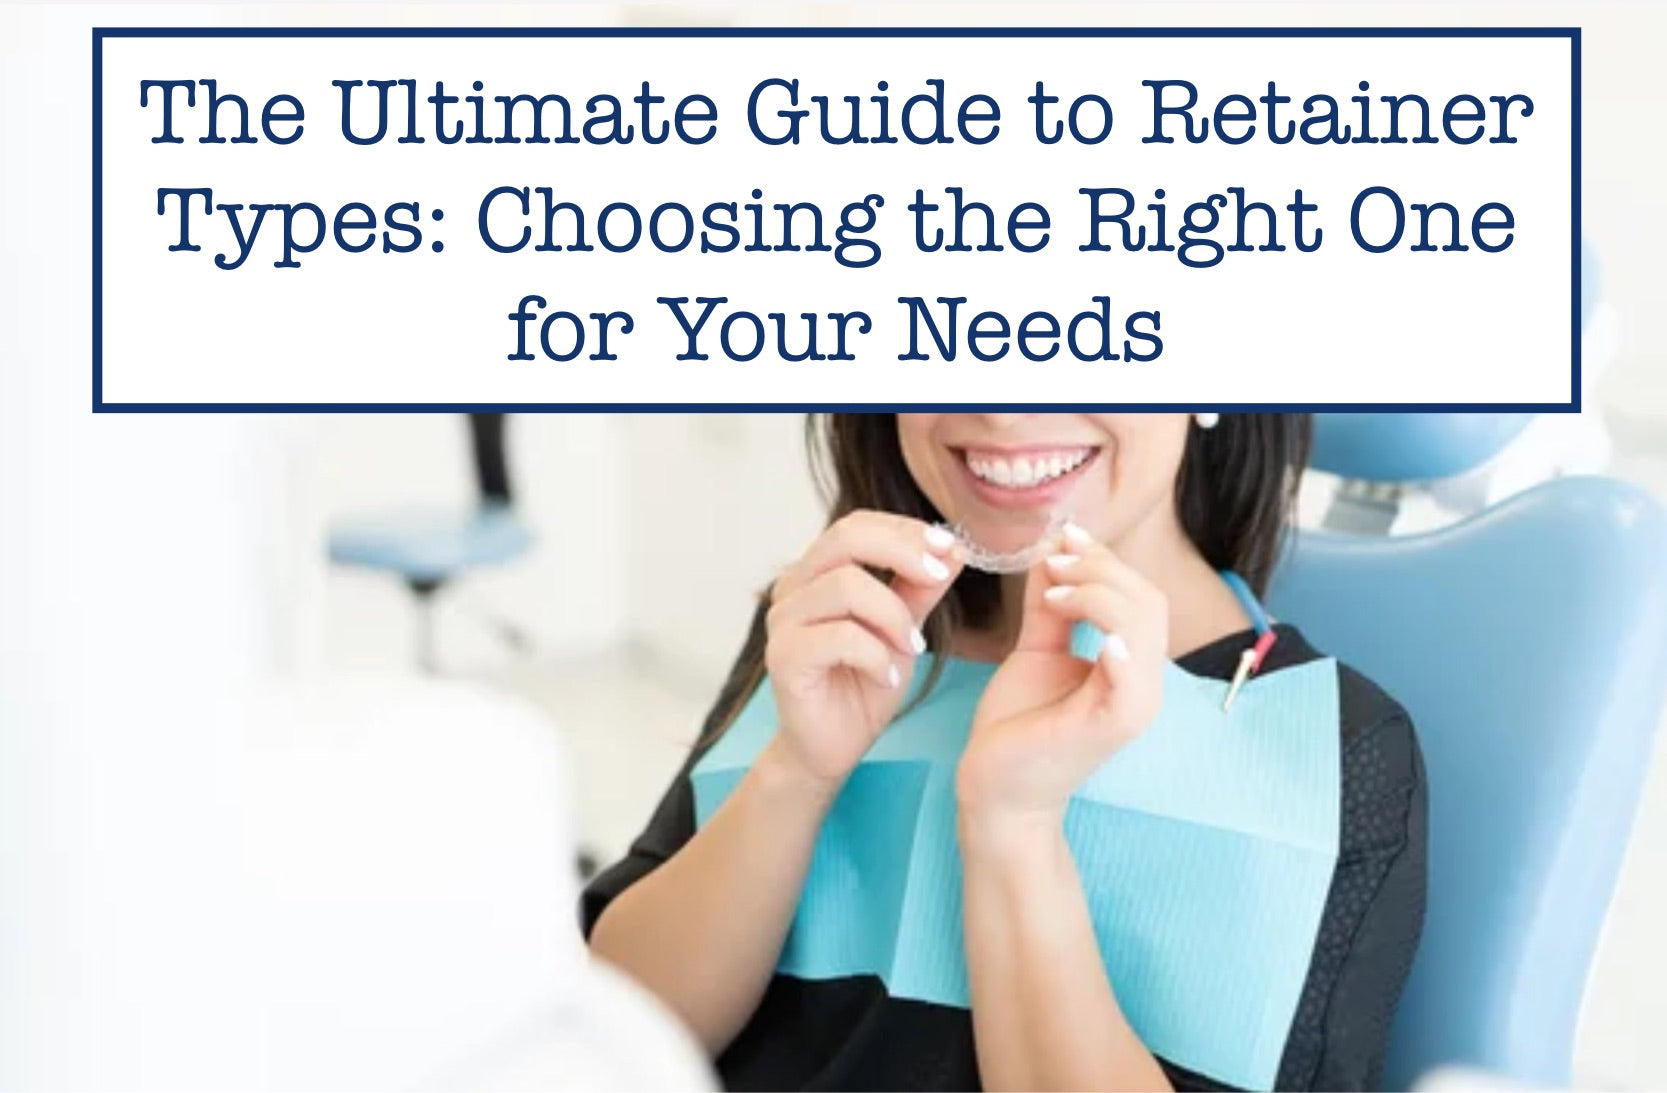 The Ultimate Guide to Retainer Types: Choosing the Right One for Your Needs